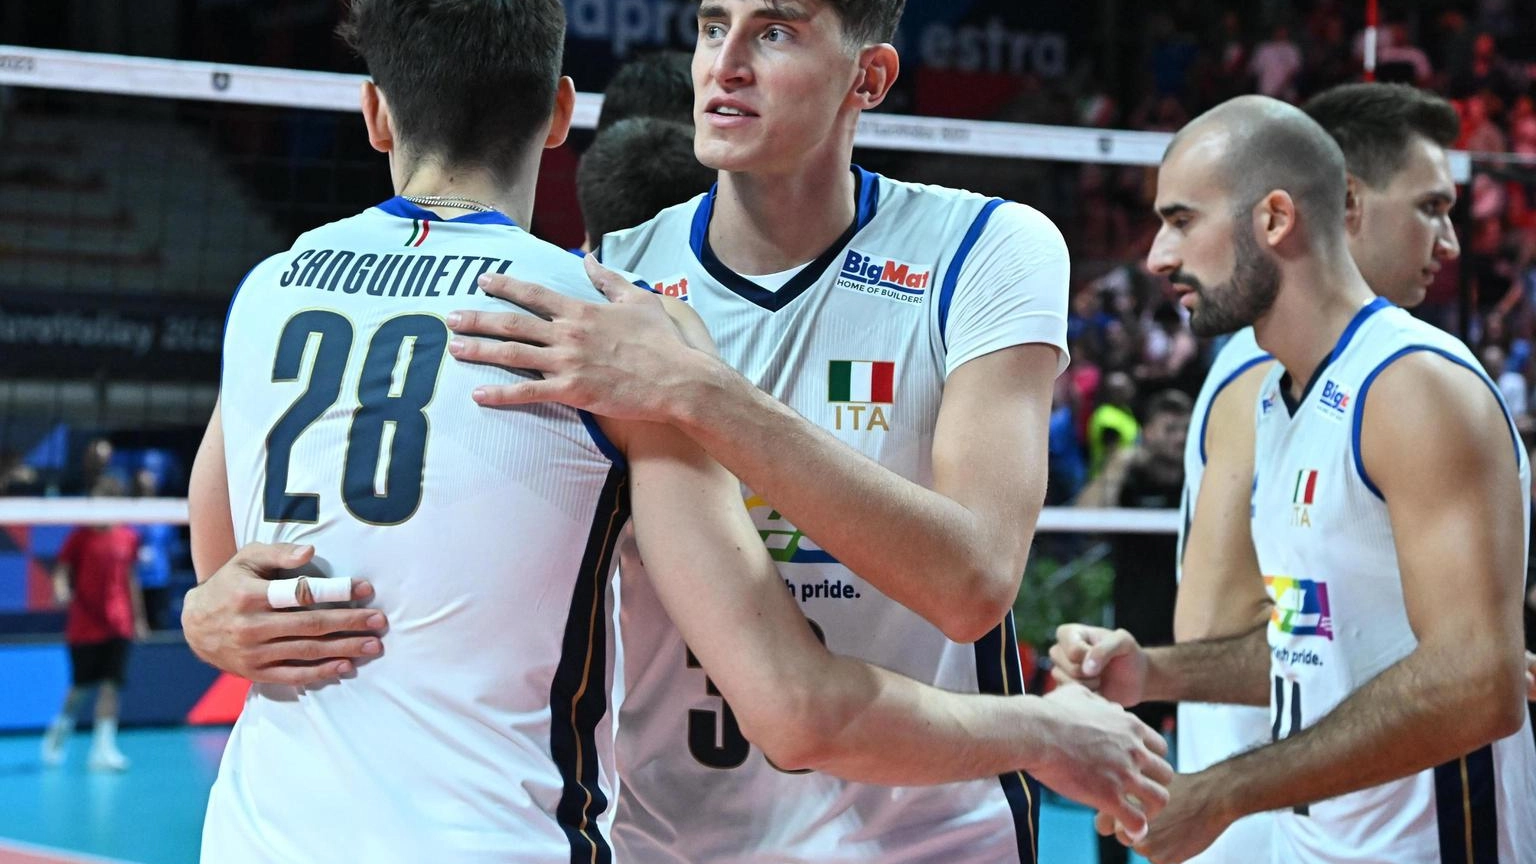 Eurovolley, Mosca "in finale spaccheremo tutto"